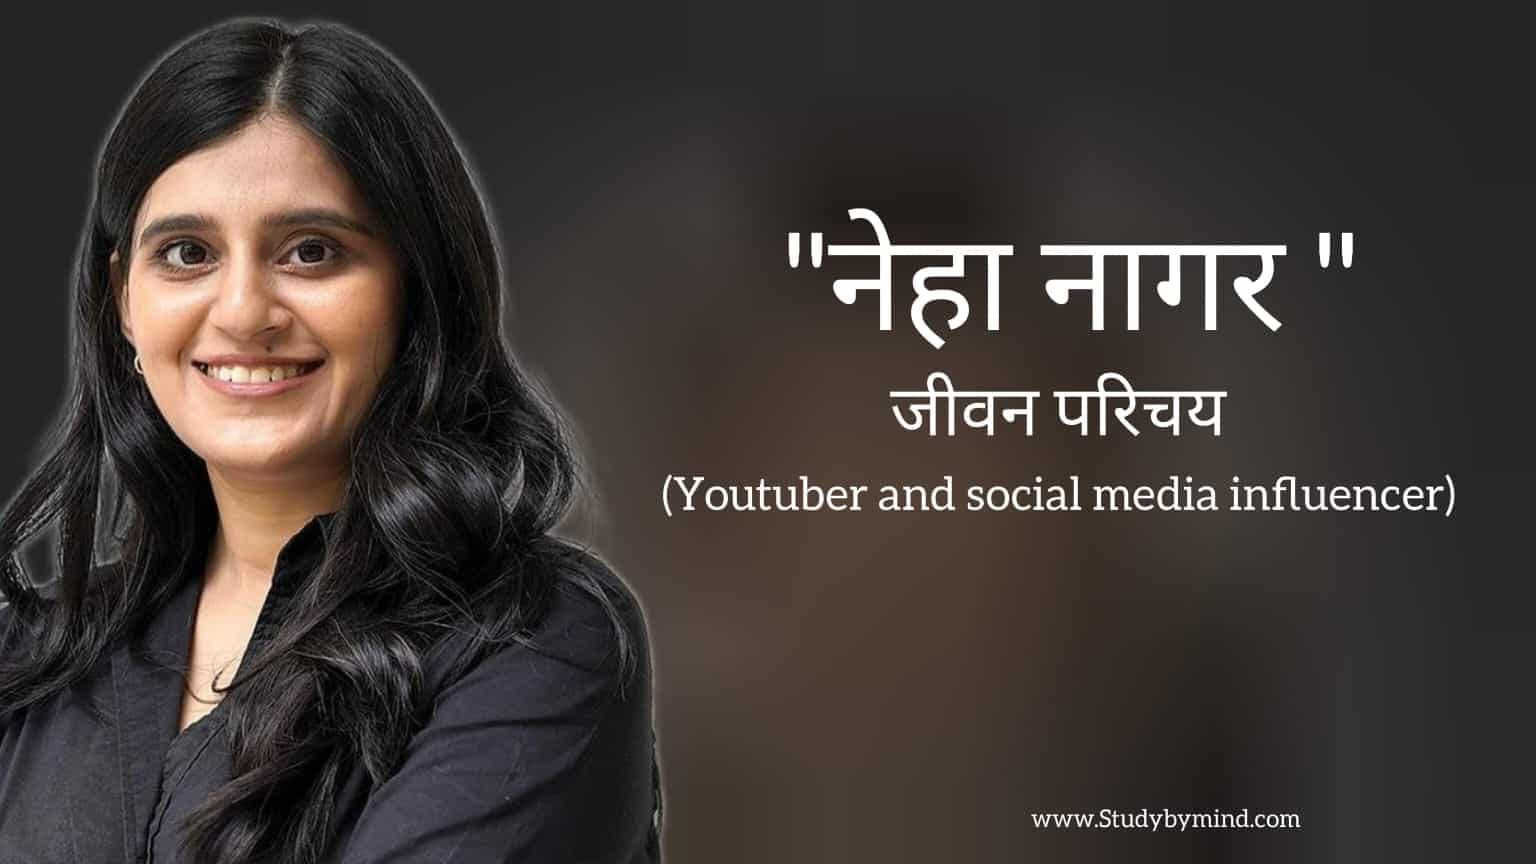 You are currently viewing नेहा नागर जीवन परिचय Neha Nagar biography in hindi (Social media influencer and Youtuber)